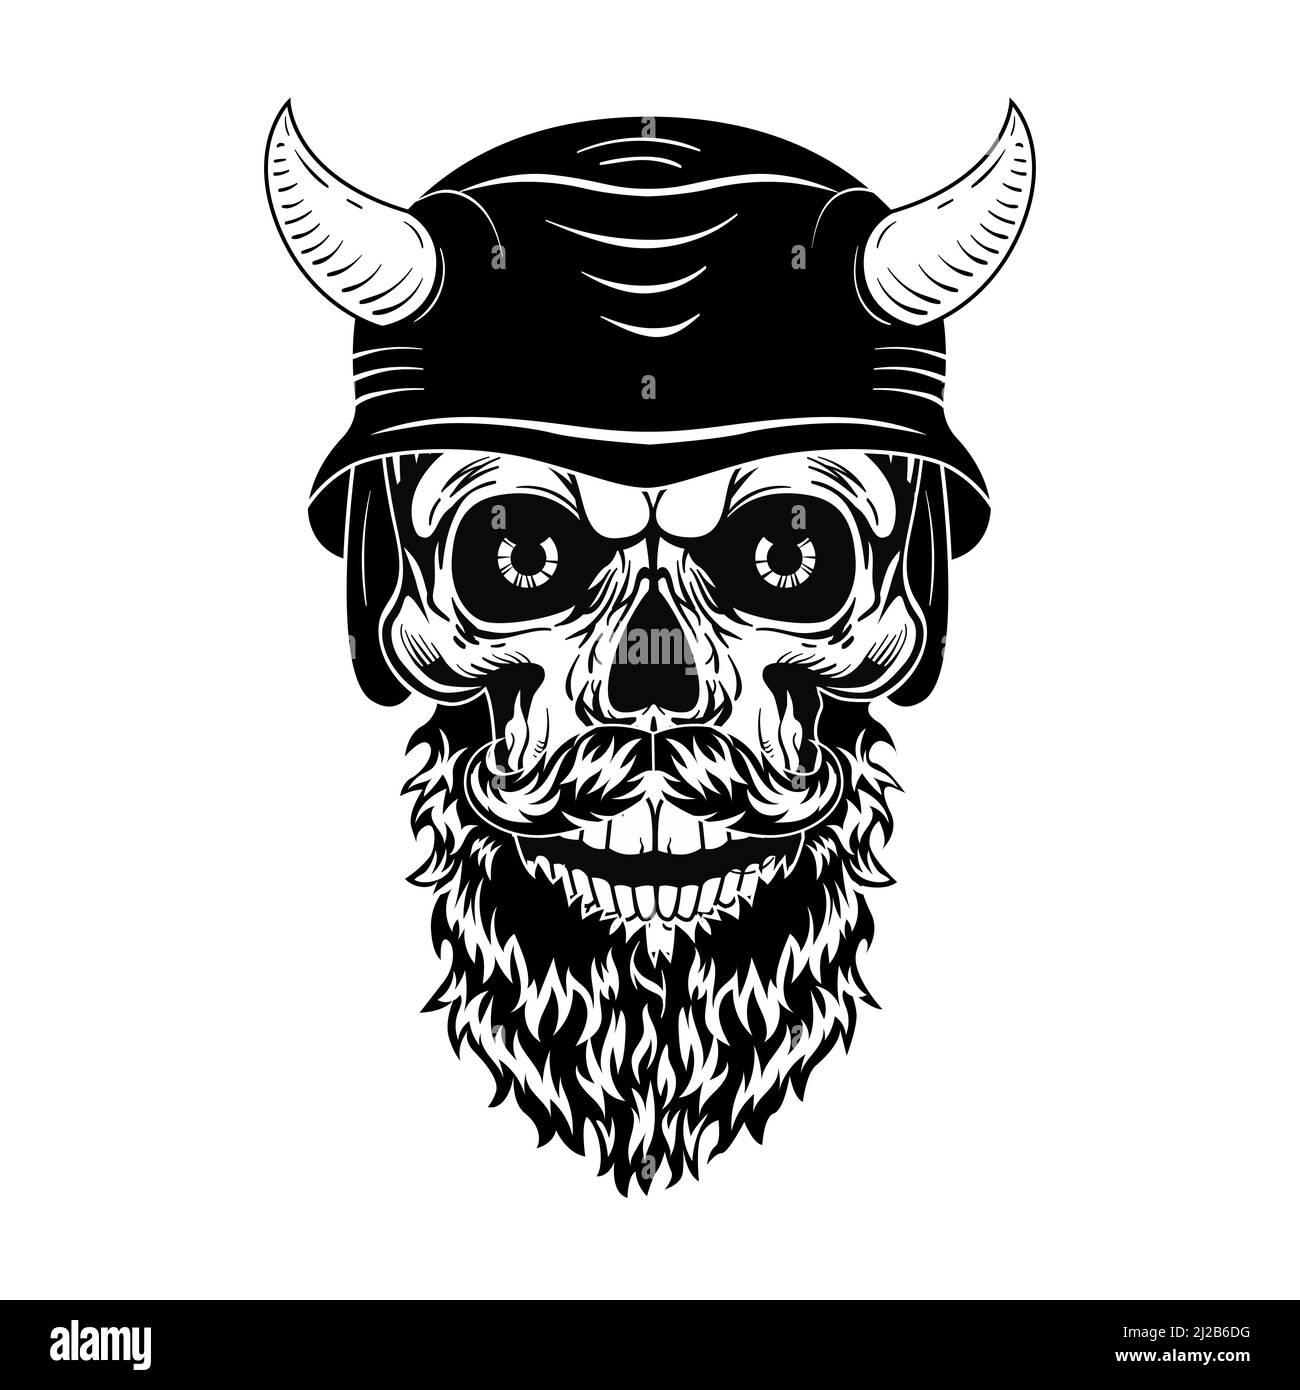 Retro skull in helmet with horns vector illustration. Monochrome dead head with beard. Tattoo design and rebel community concept can be used for retro Stock Vector